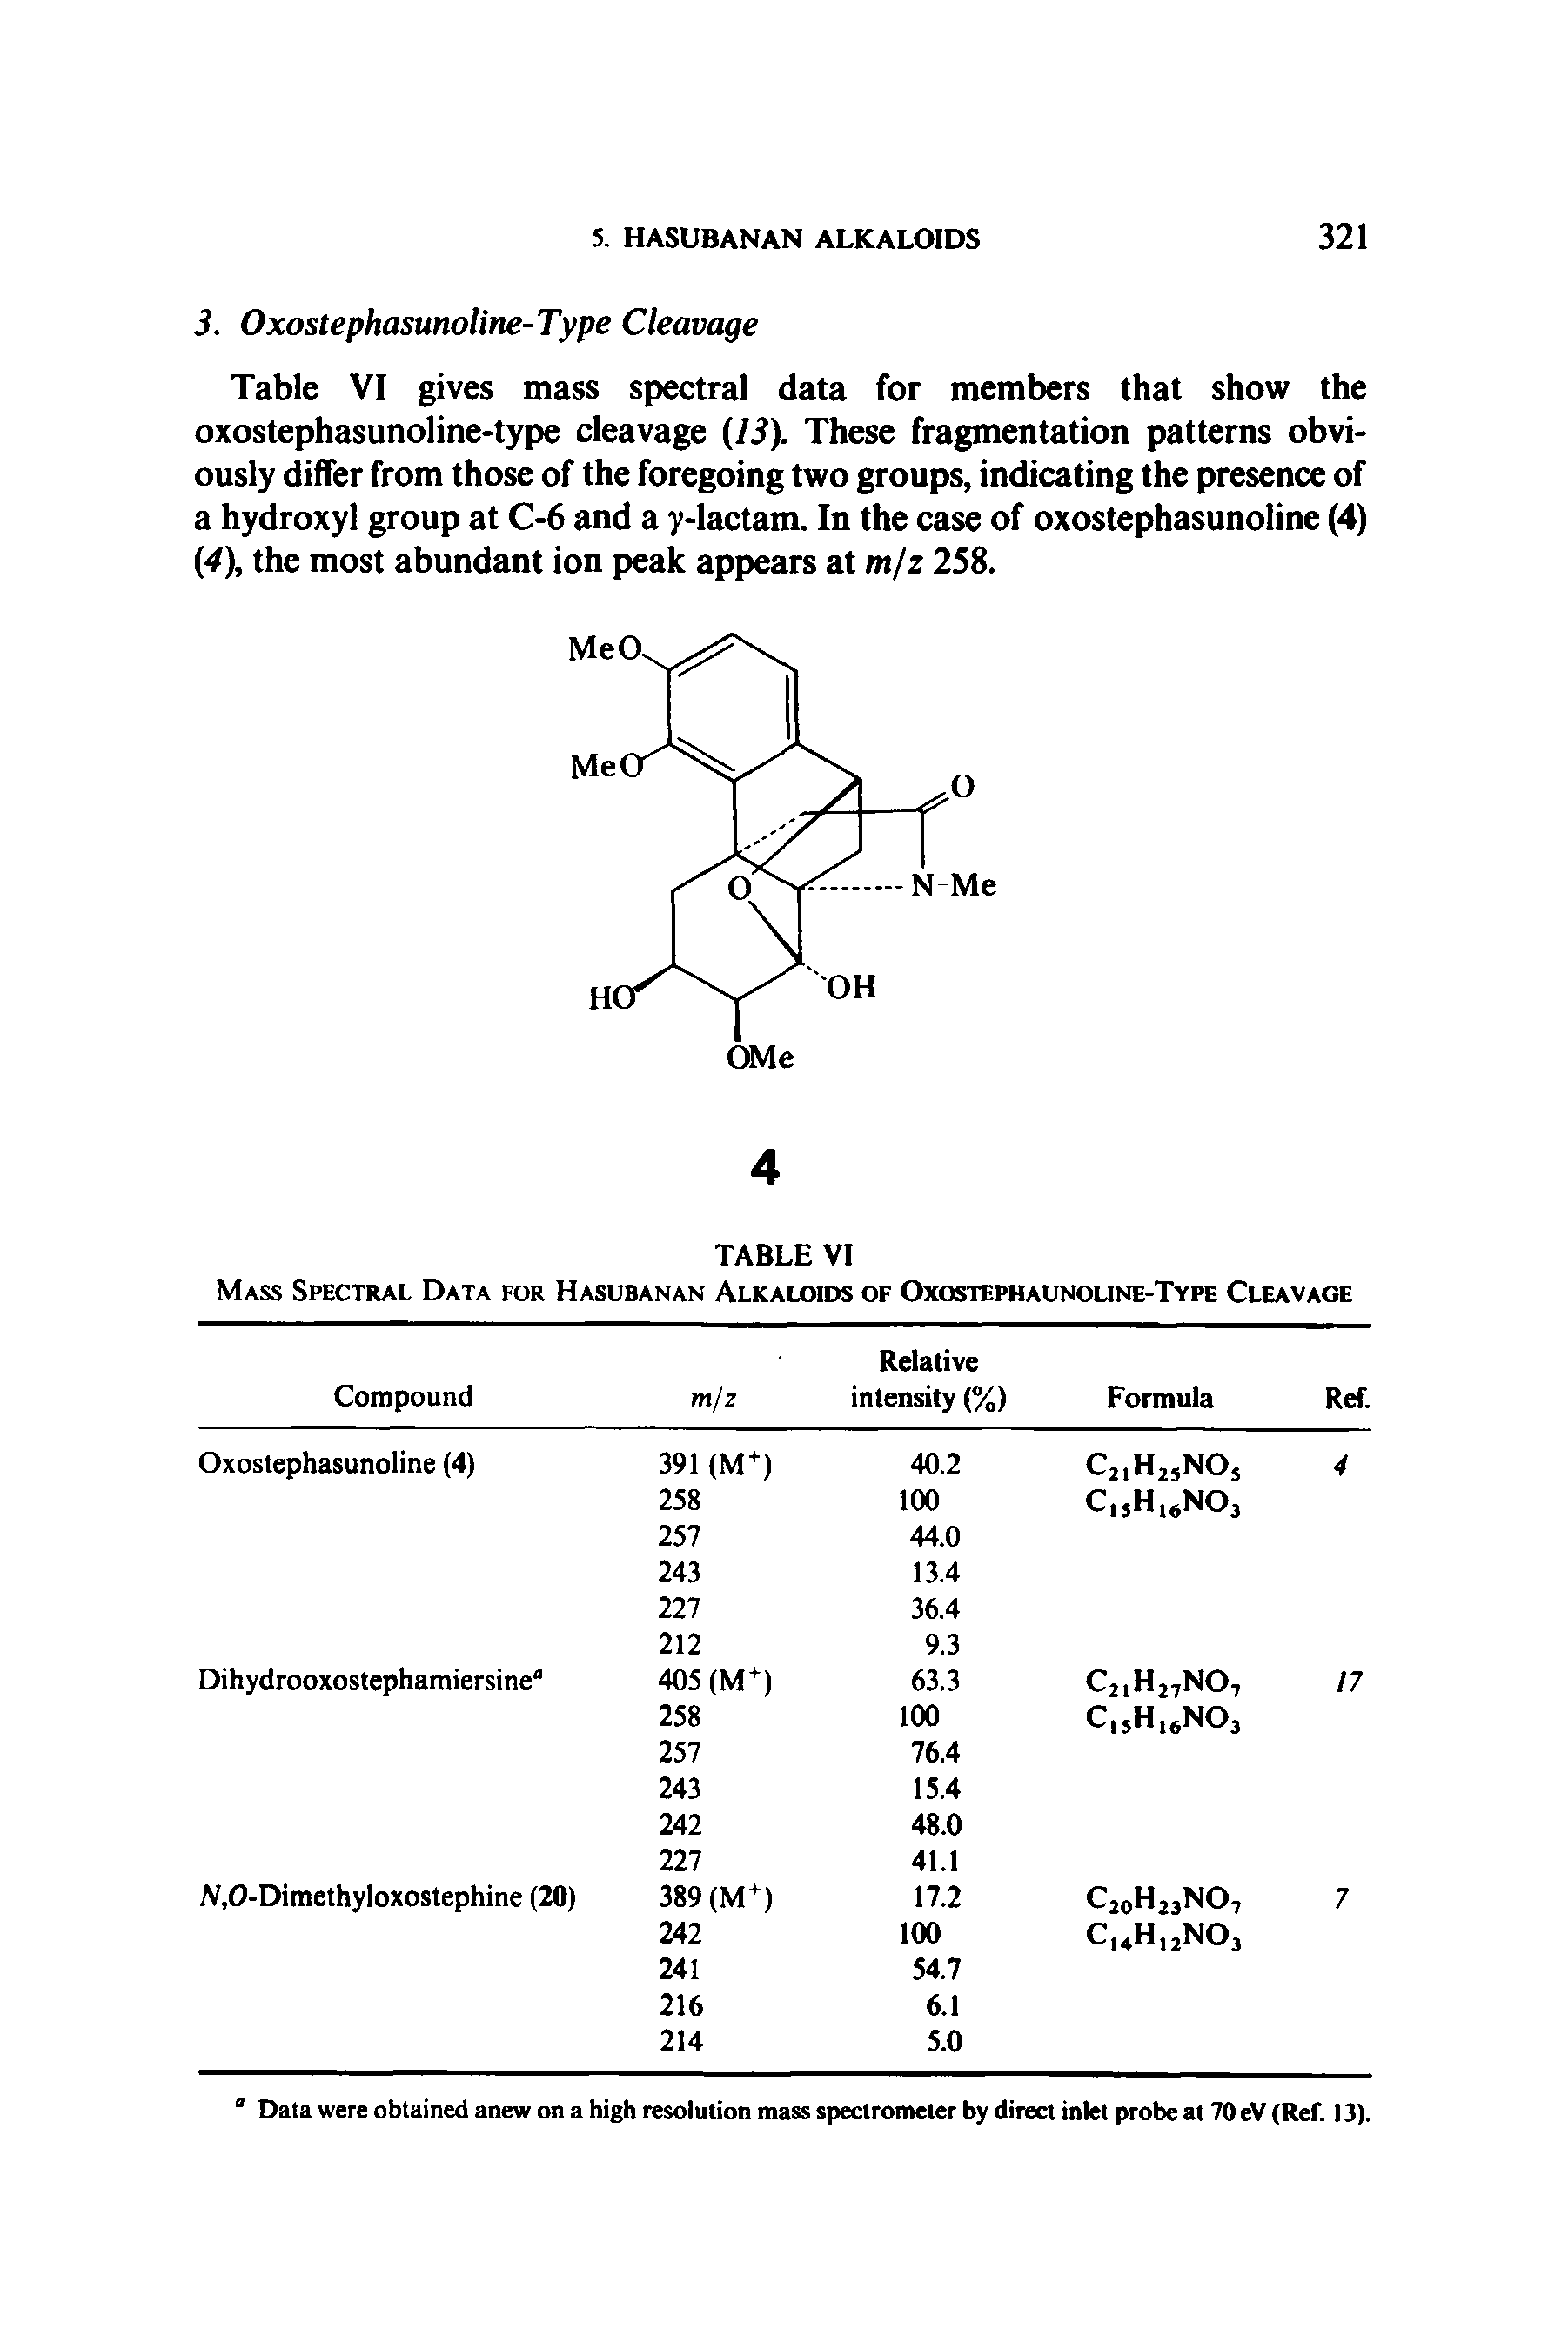 Table VI gives mass spectral data for members that show the oxostephasunoline-type cleavage (13). These fragmentation patterns obviously differ from those of the foregoing two groups, indicating the presence of a hydroxyl group at C-6 and a y-lactam. In the case of oxostephasunoline (4) (4), the most abundant ion peak appears at mjz 258.